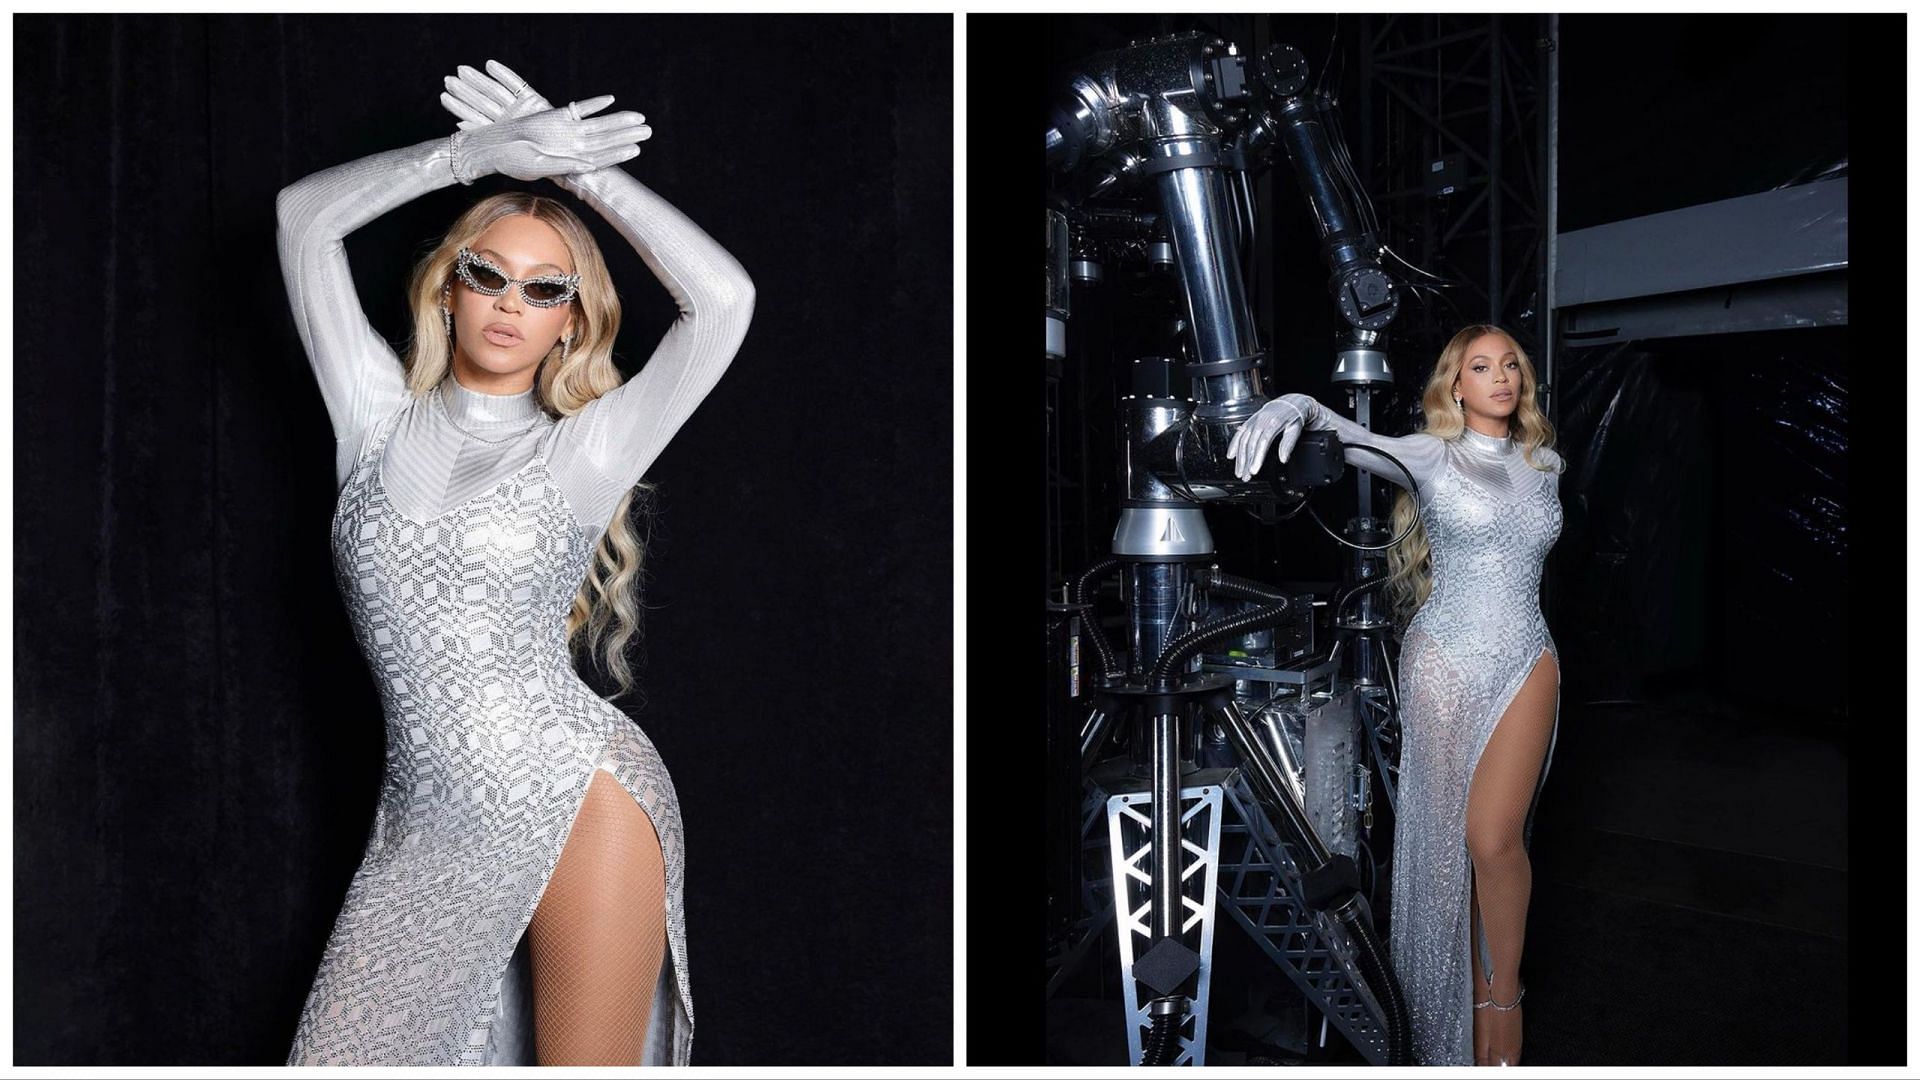 Two Portraits of Beyonce (Image via official Instagram @beyonce)